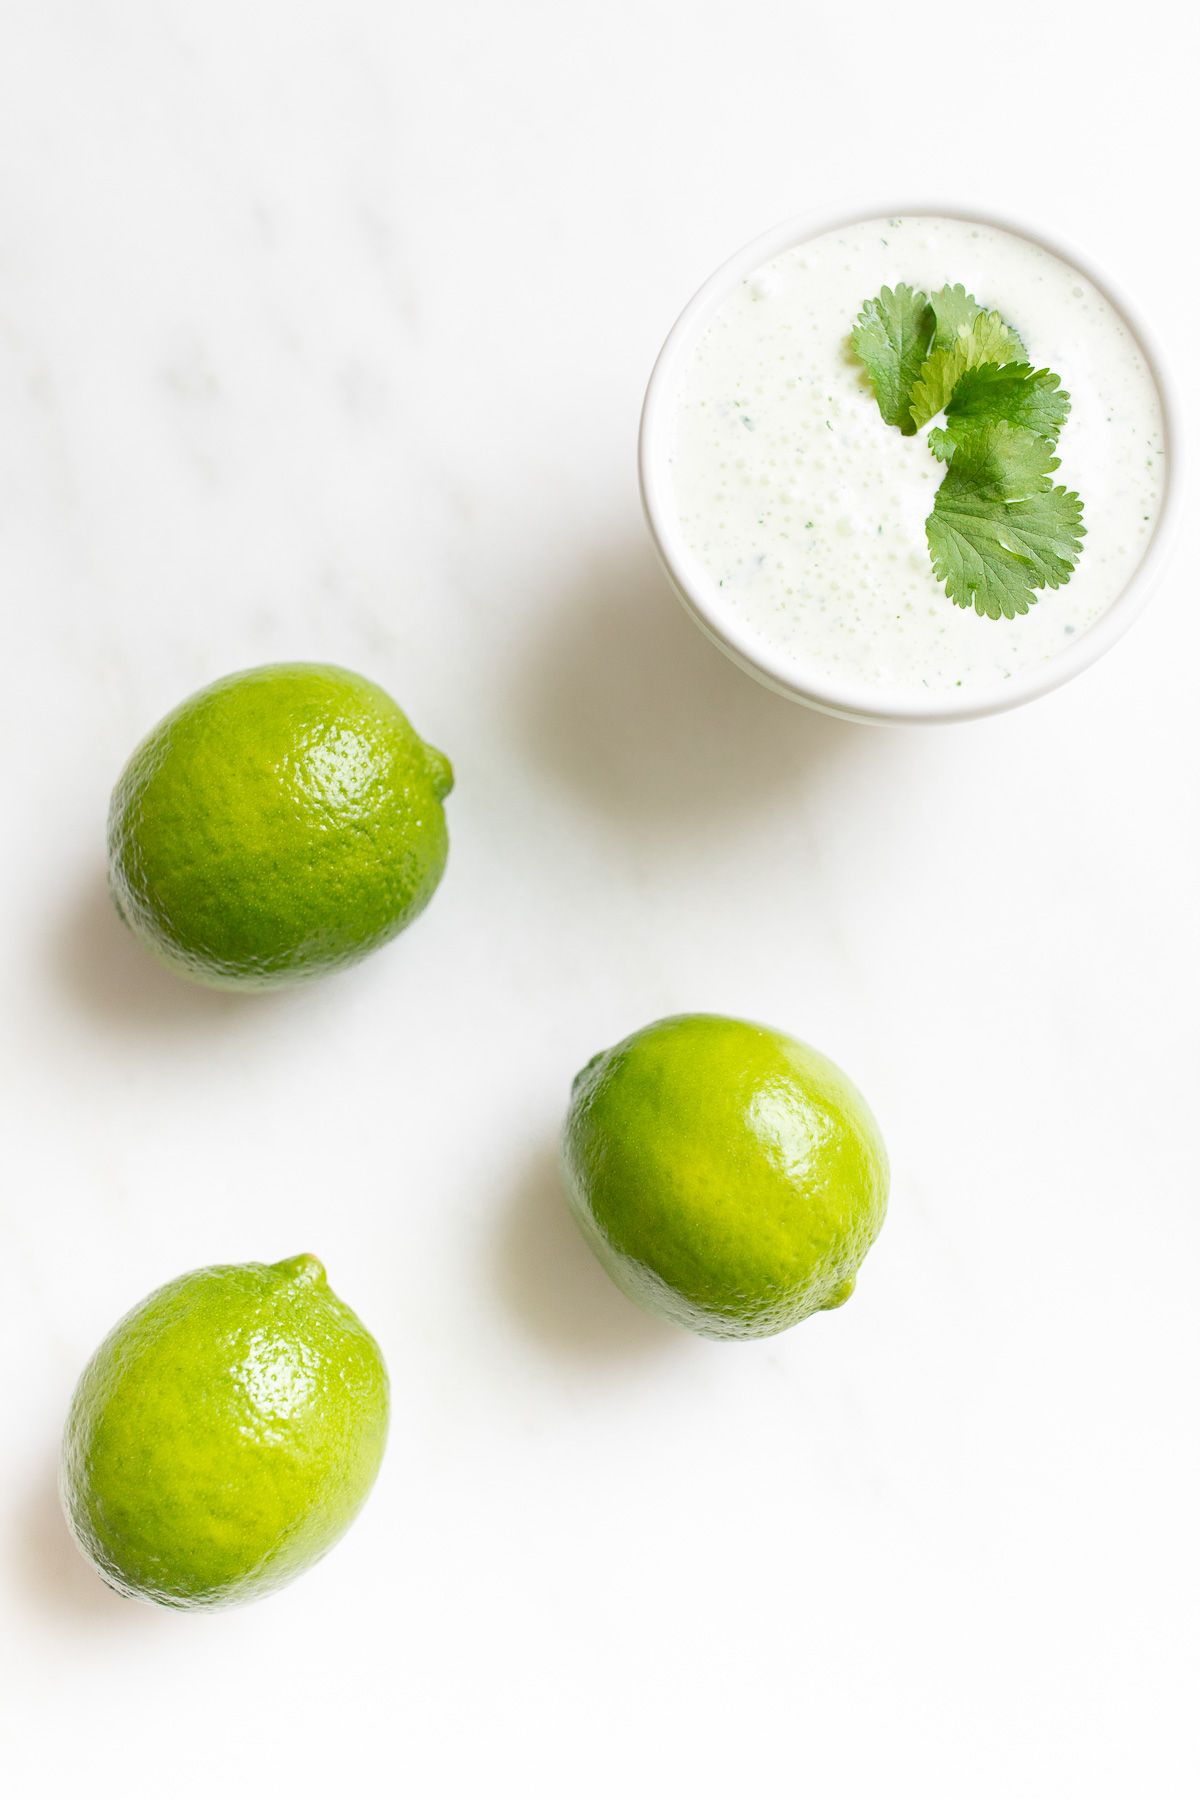 A white bowl of crema de cilantro on a white countertop, garnished with cilantro, limes to the side.